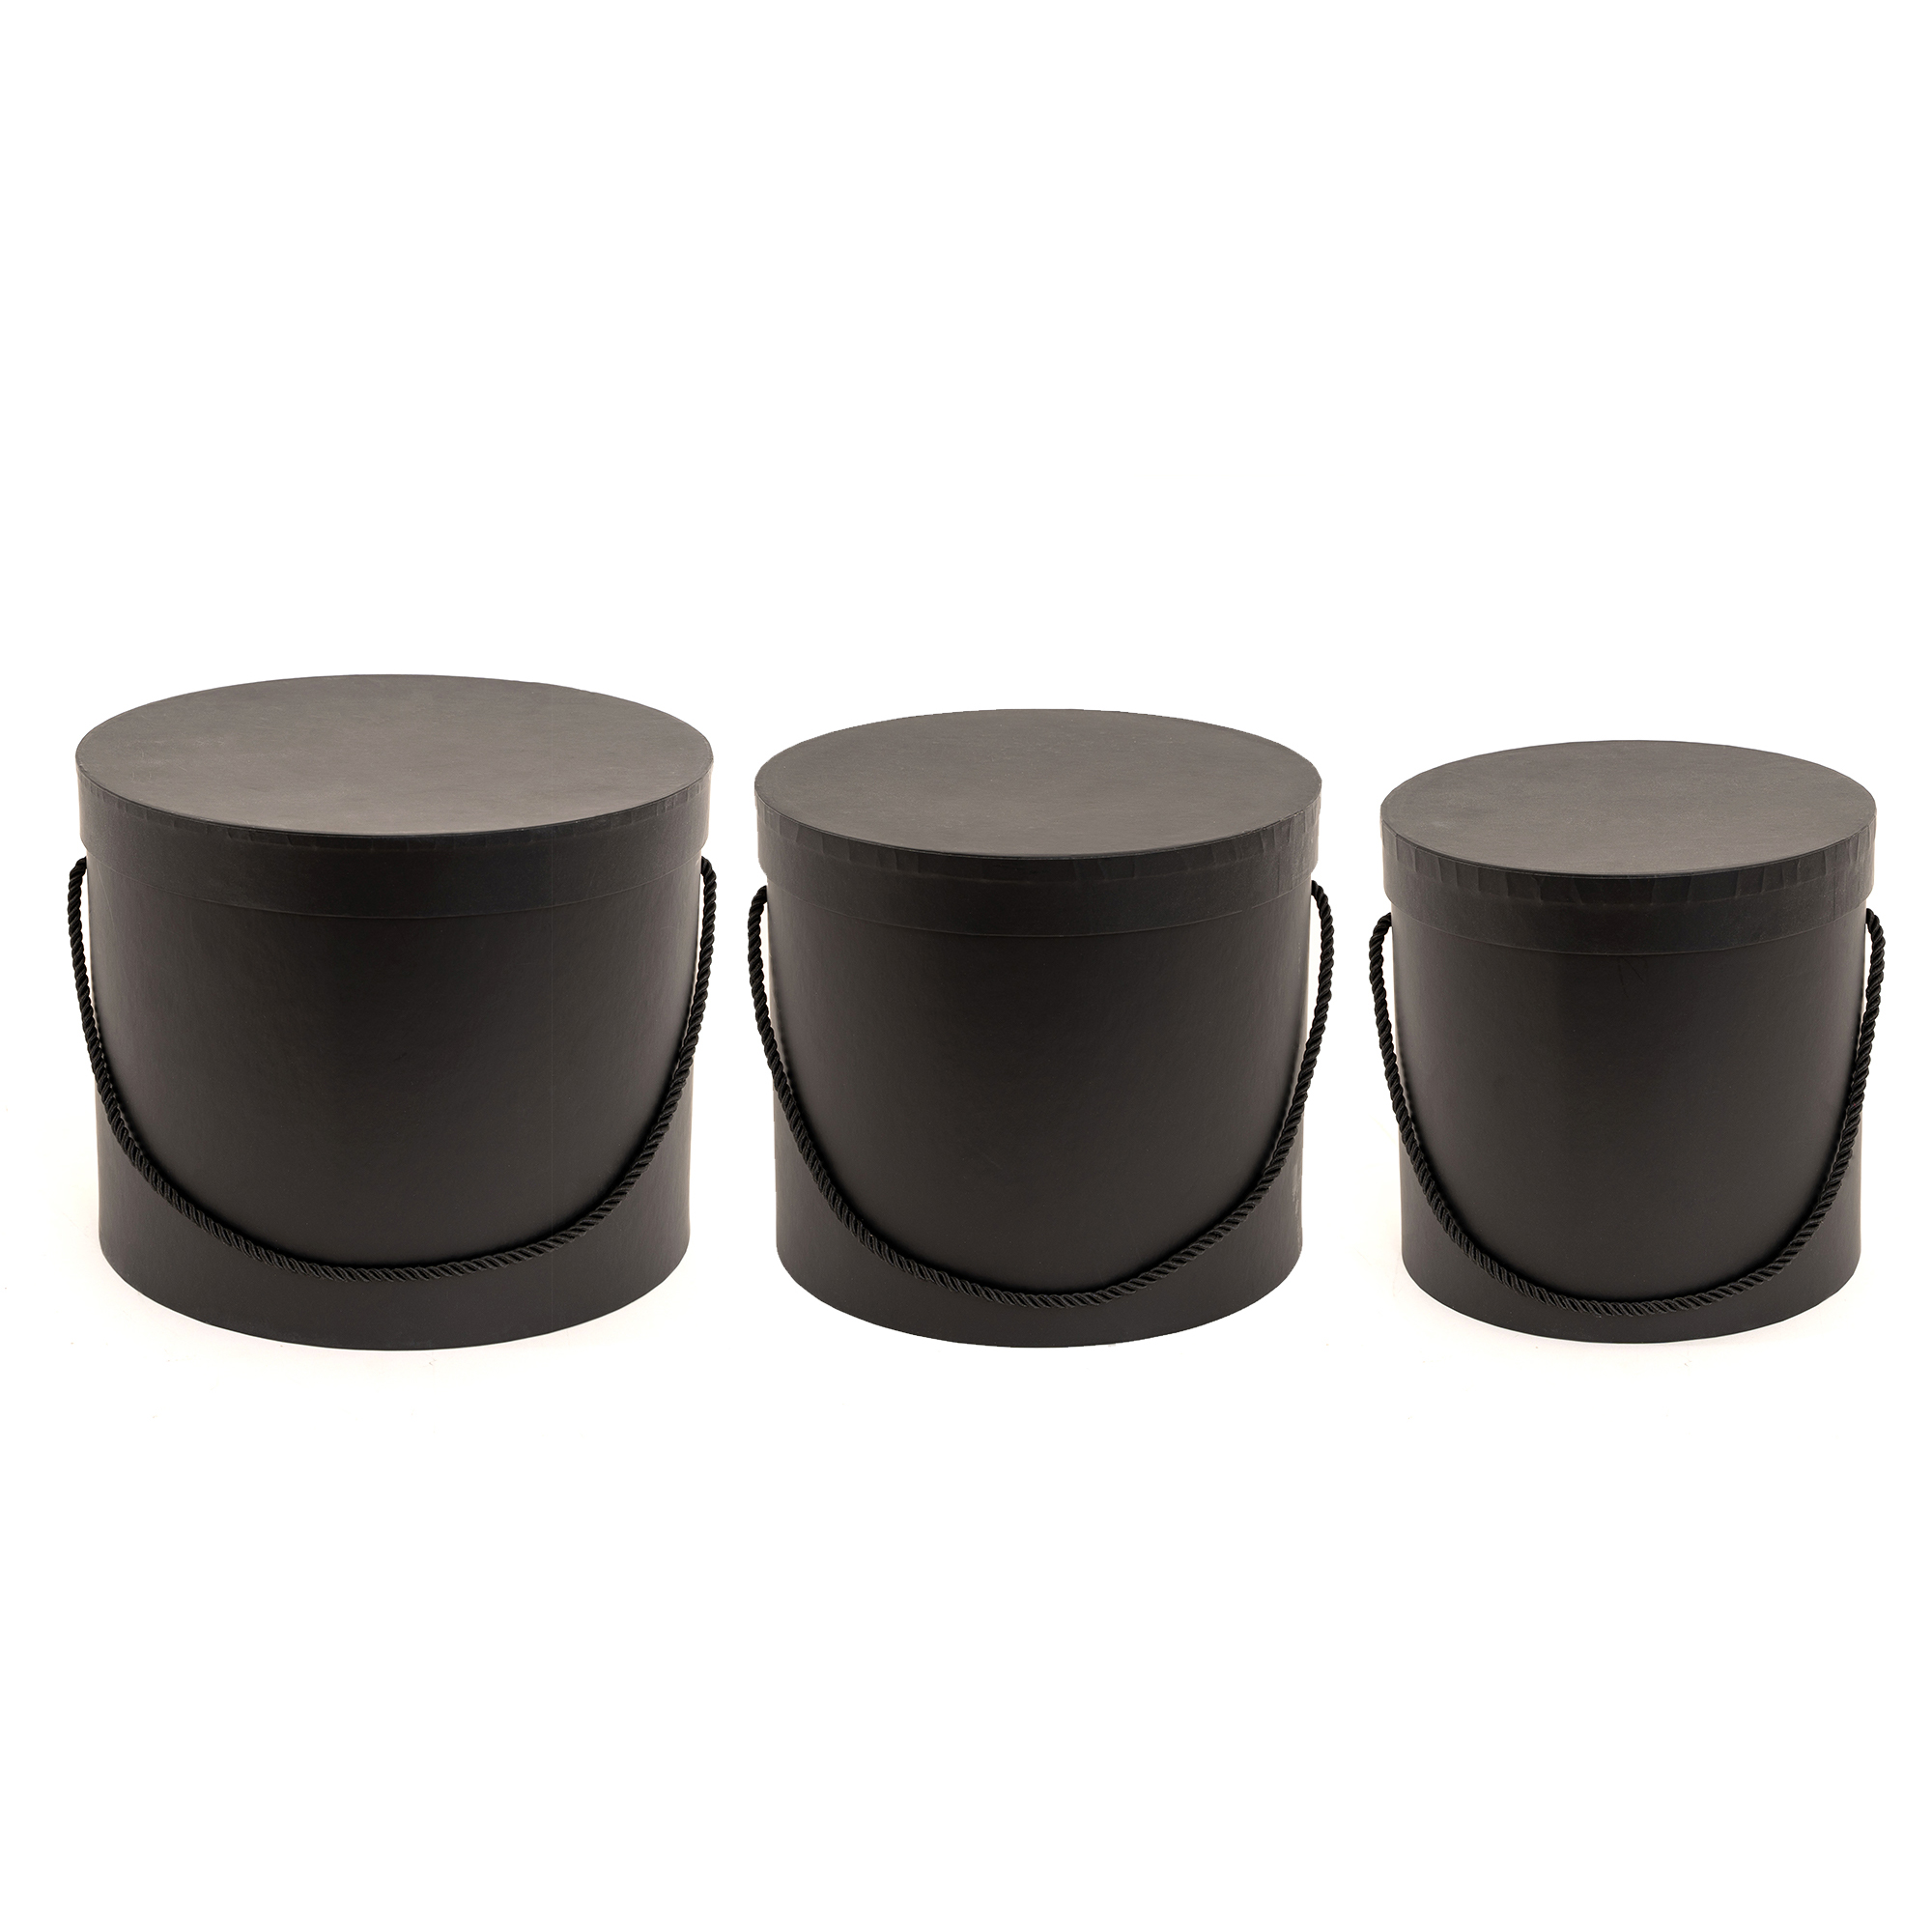 Nested Floral Boxes 3pc/set - All Black